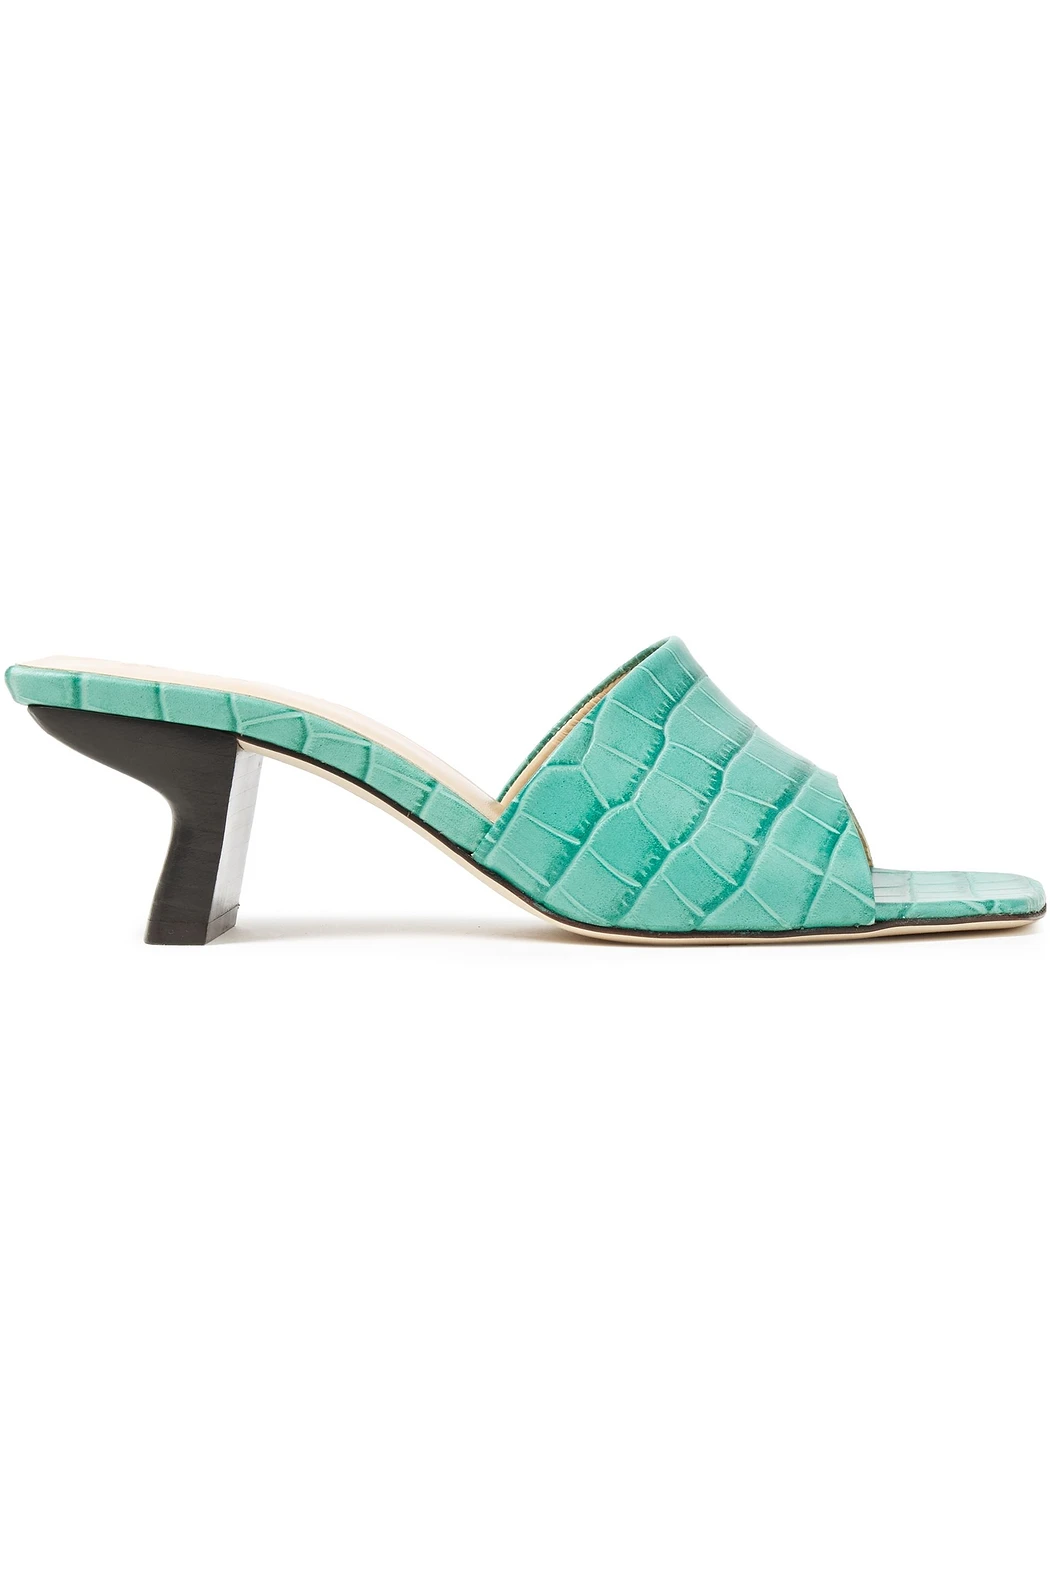 16 Summer Sandals to Shop From The Outnet | Who What Wear